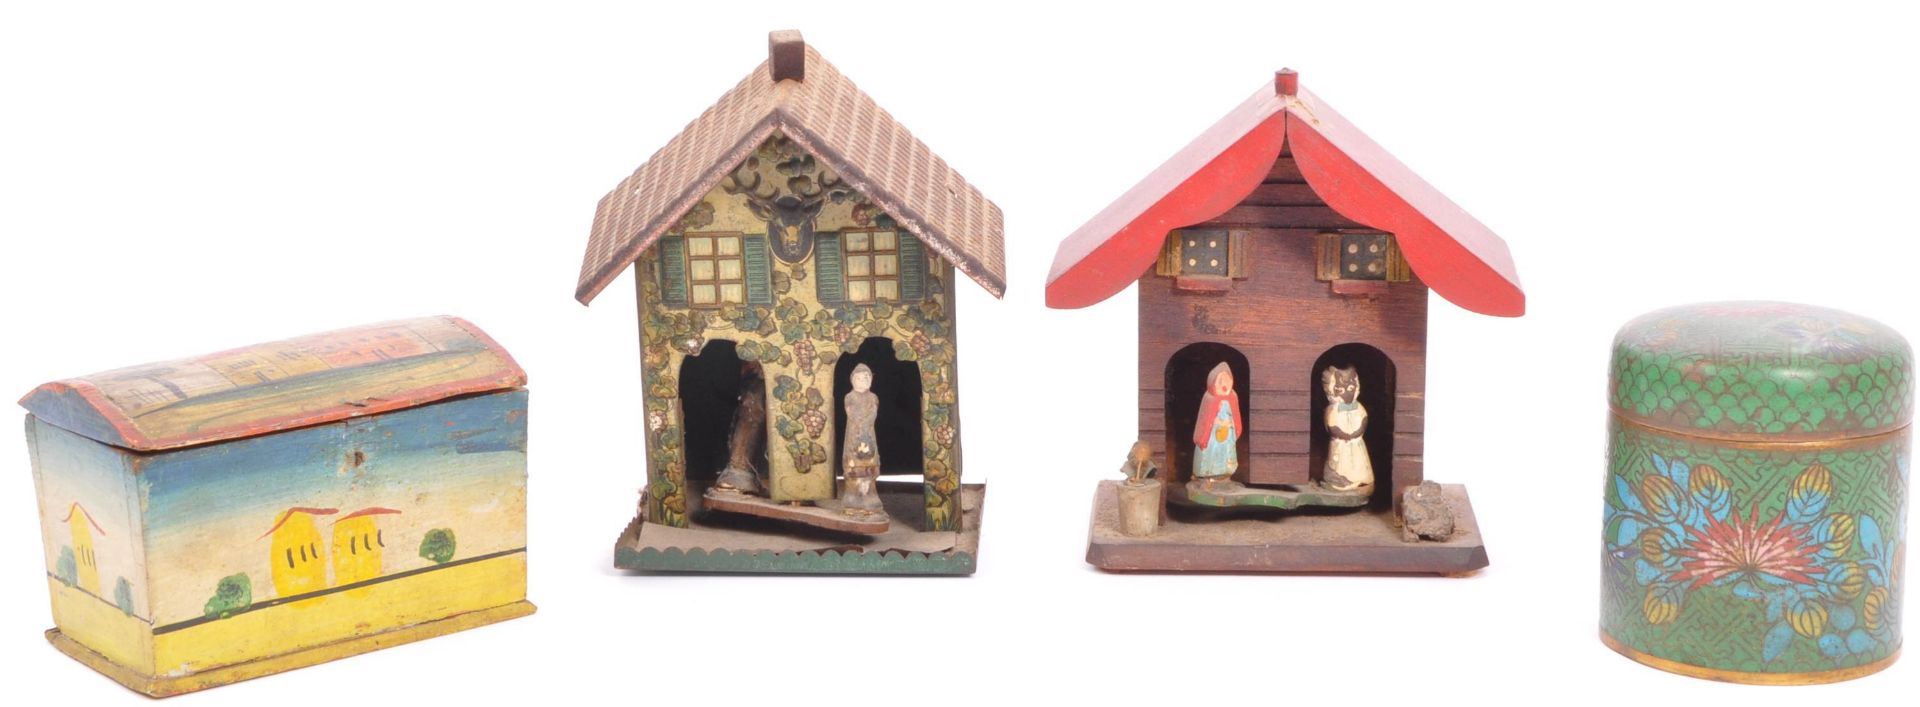 WOODEN & TIN PLATE WEATHER HOUSES & BOXES - TINS